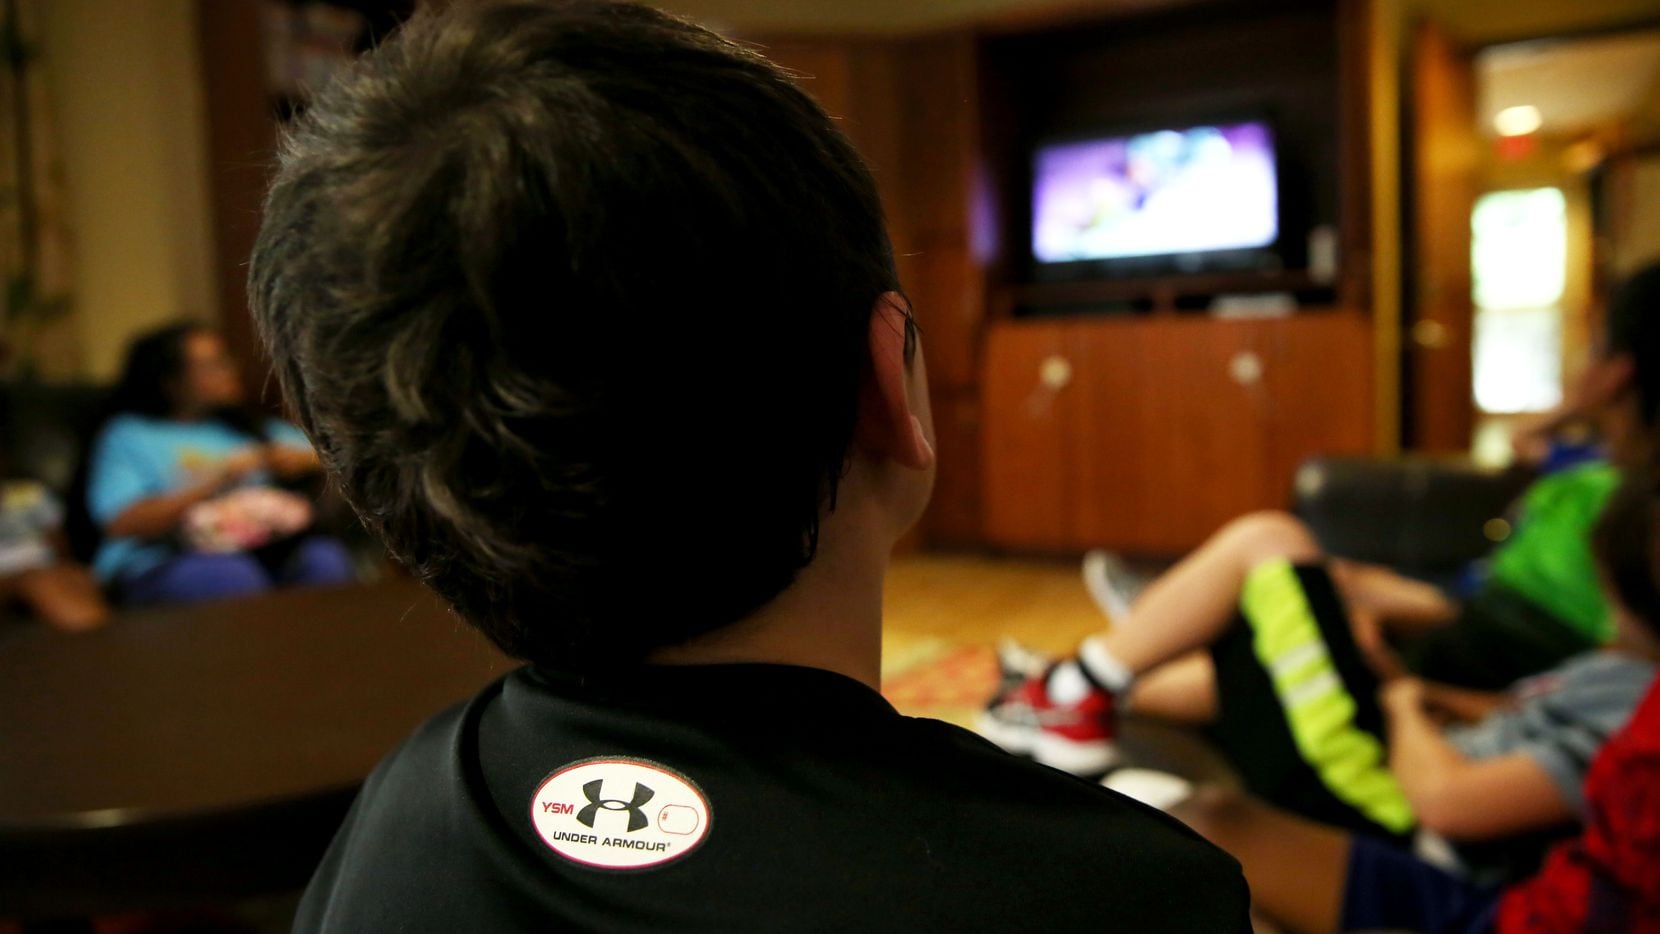 A boy watches TV at Jonathan's Place, which serves abused and neglected children, in Garland.